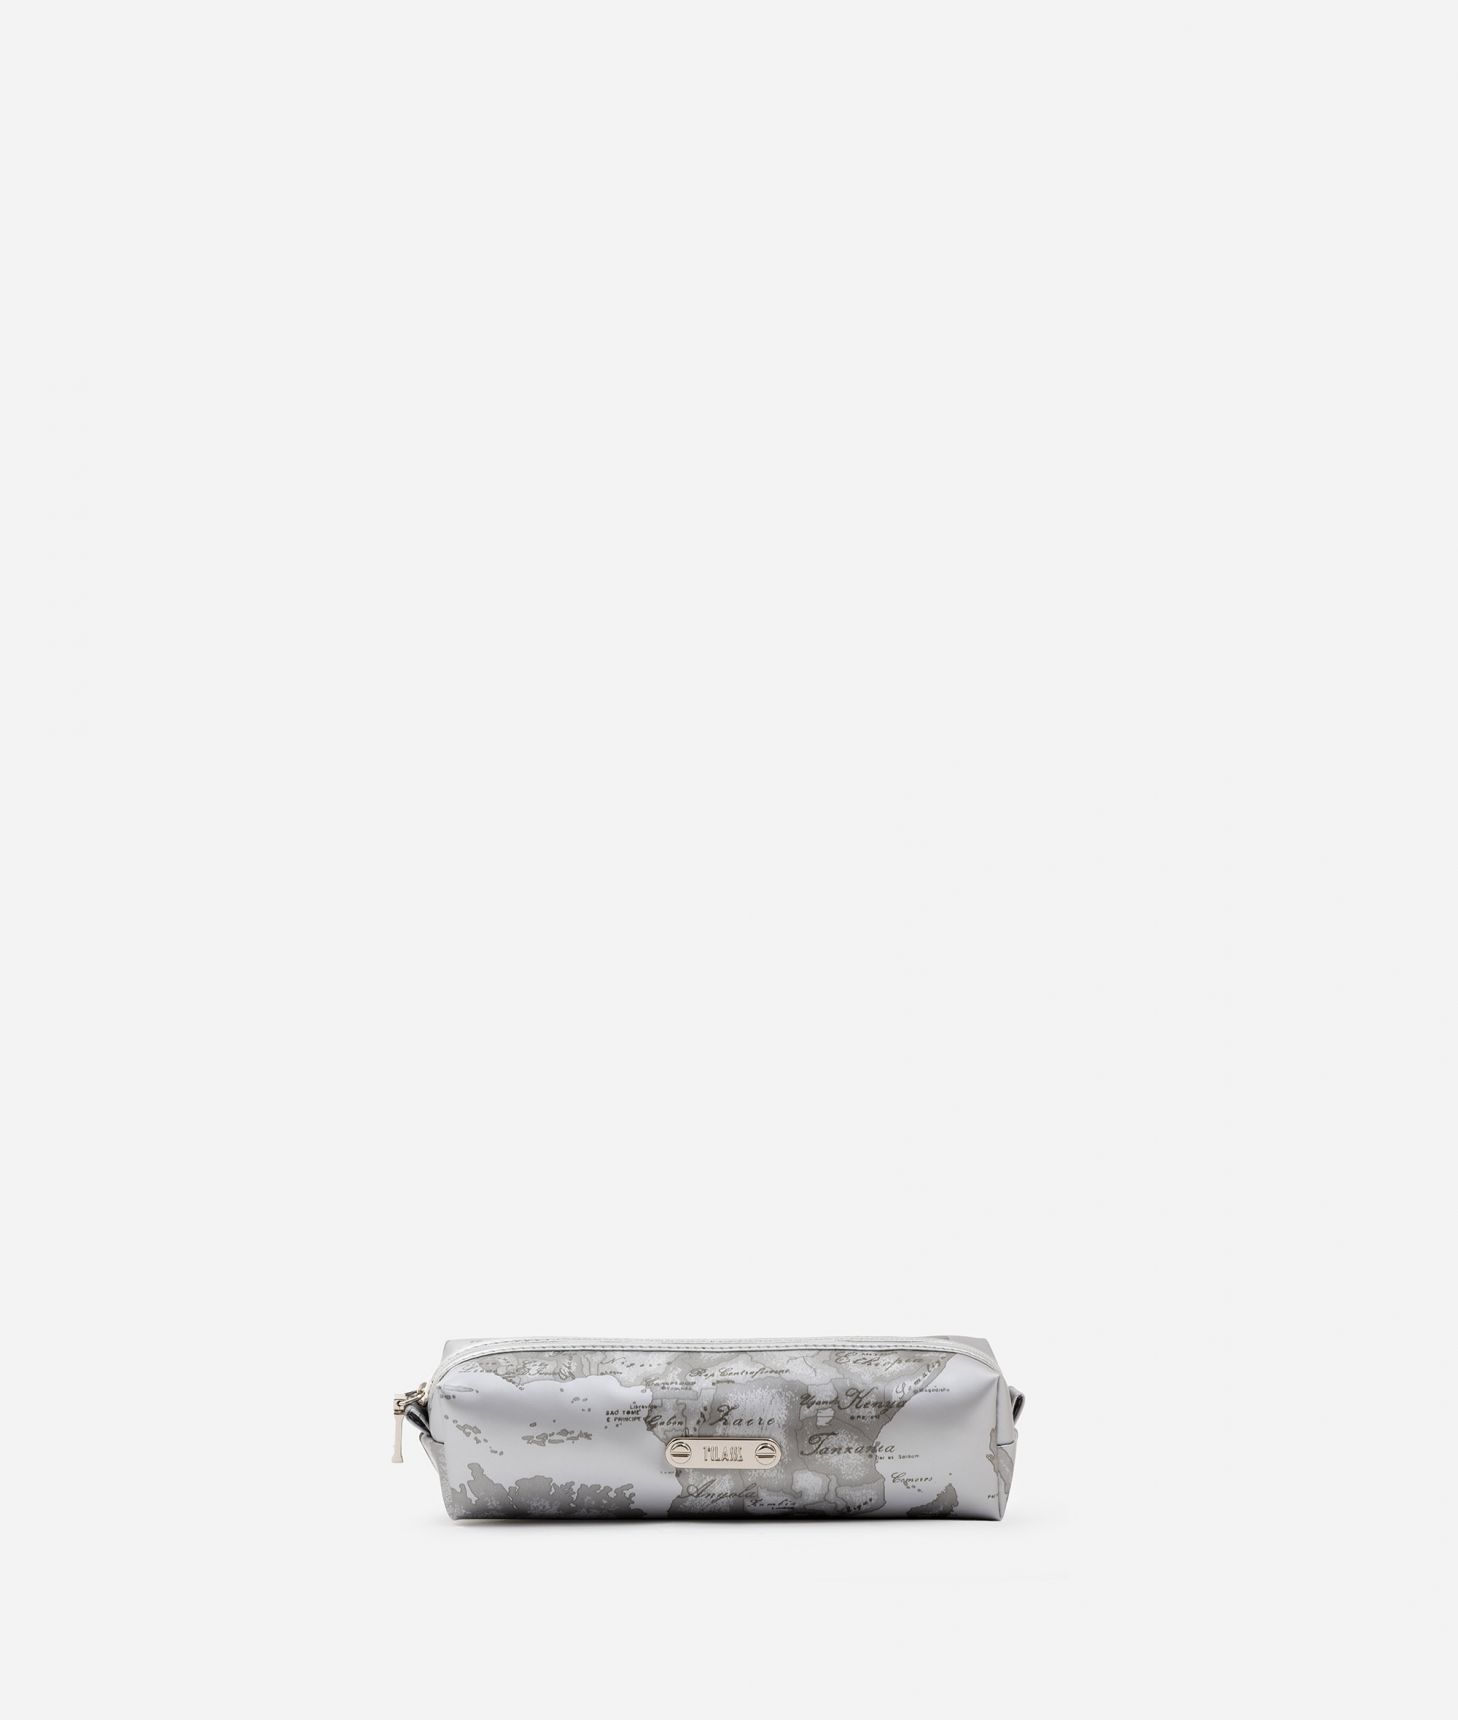 Travel pouch in pearl grey rubberized fabric,front